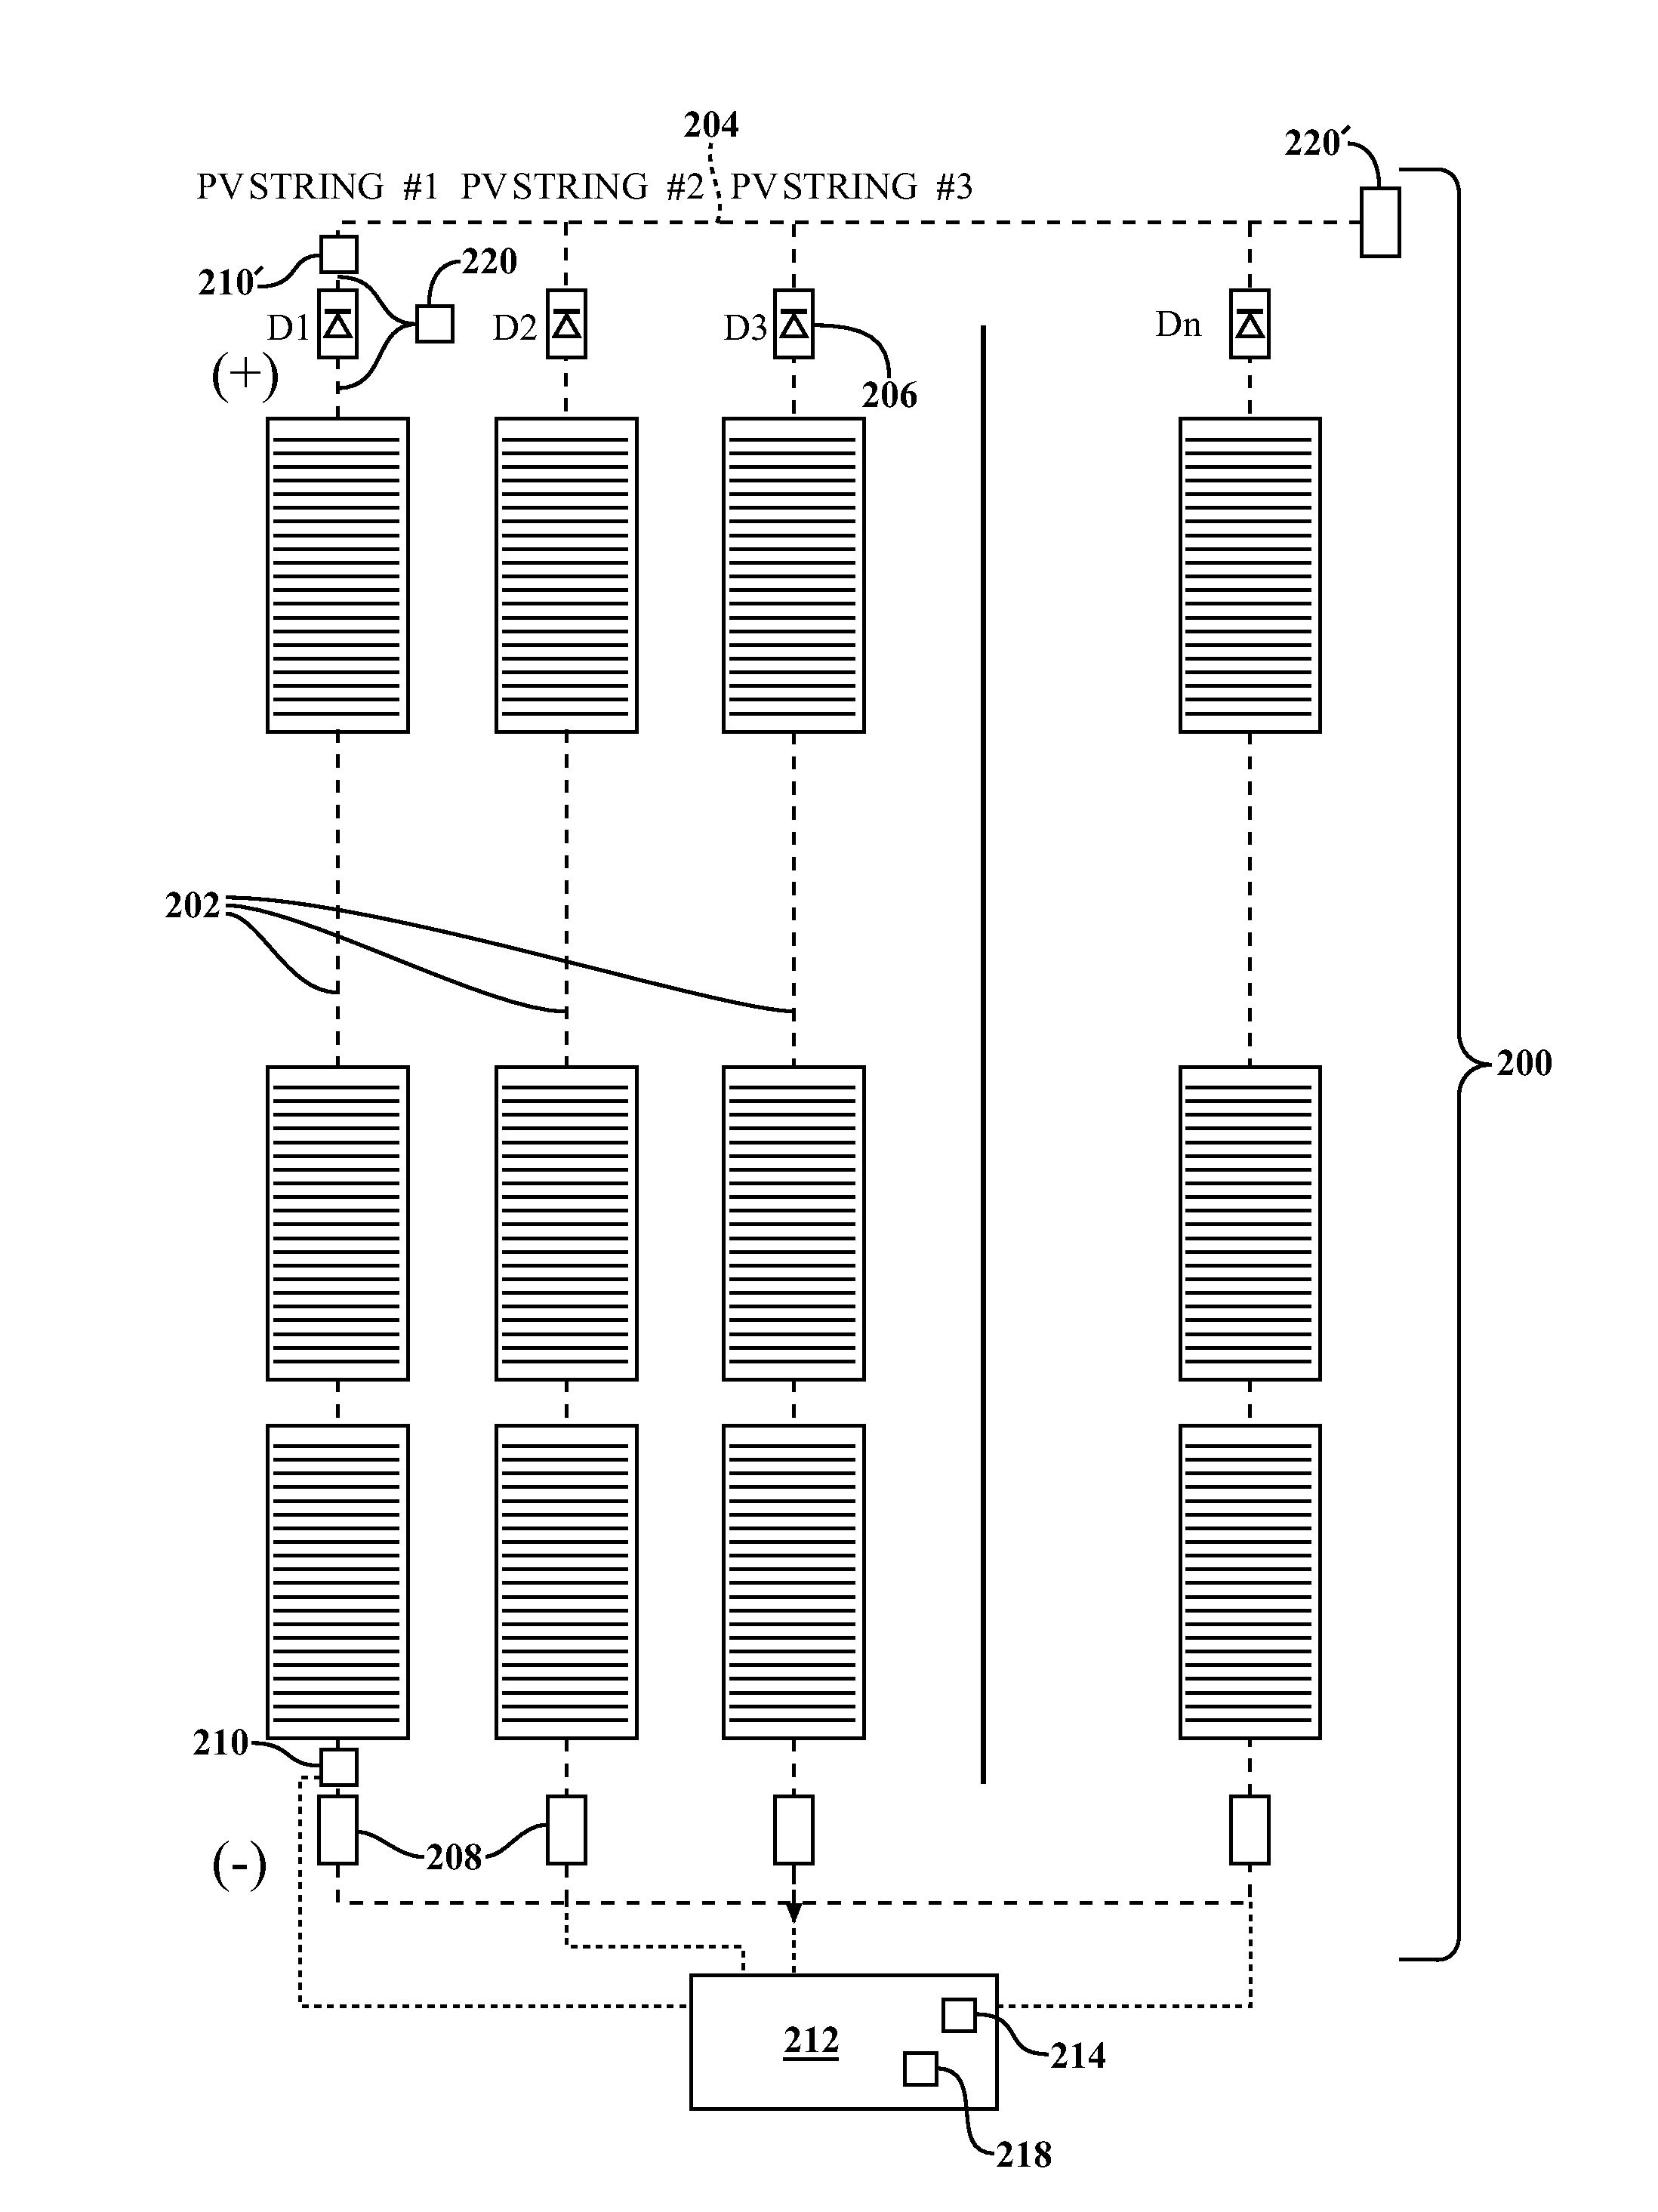 Failure detection system for photovoltaic array